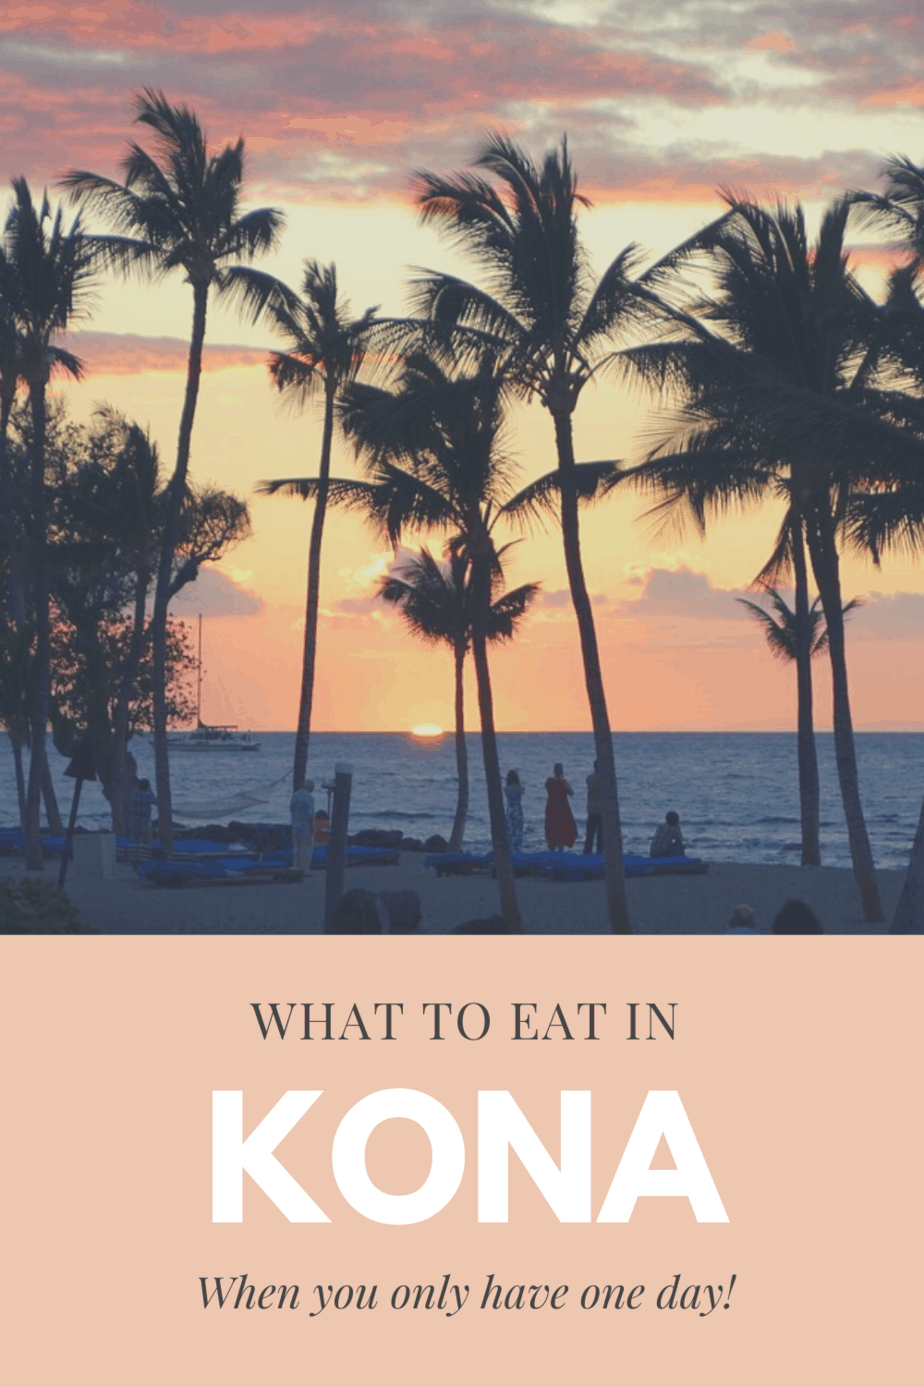 What to Eat in Kona